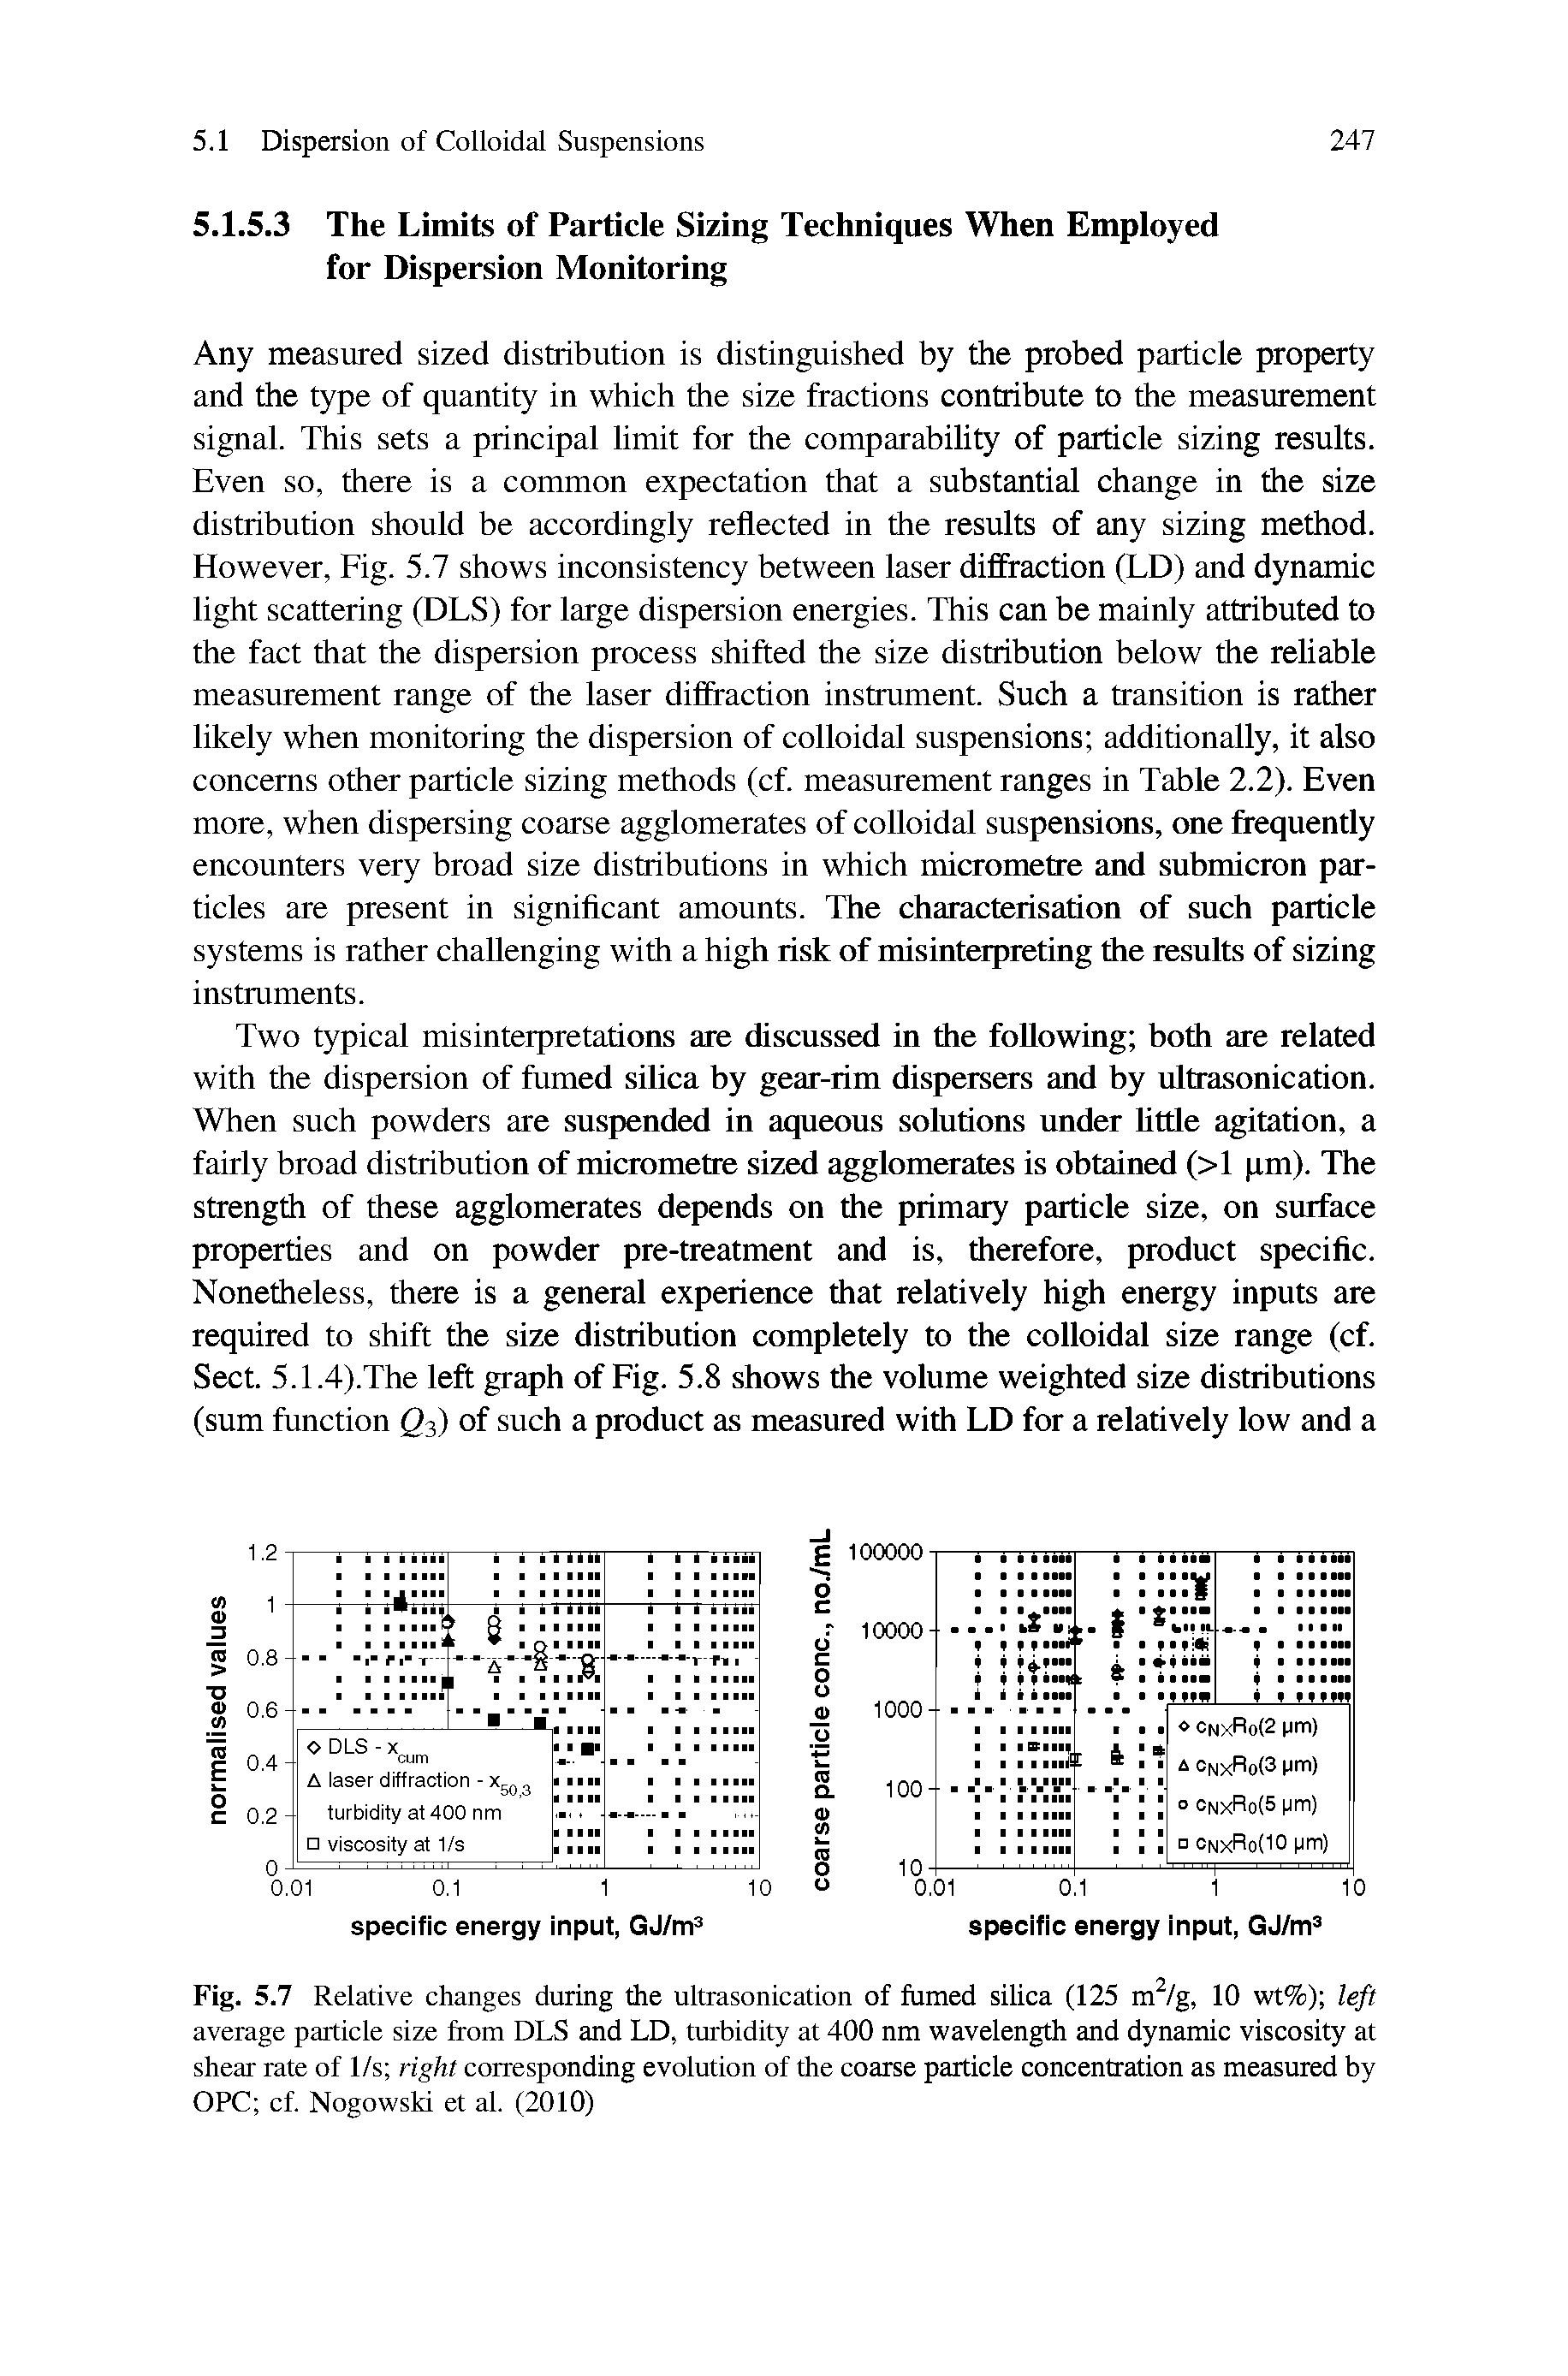 Fig. 5.7 Relative changes during the ultrasonication of fumed silica (125 myg, 10 wt%) left average particle size from DLS and LD, turbidity at 400 nm wavelength and dynamic viscosity at shear rate of 1/s right corresponding evolution of the coarse particle concentration as measured by OPC cf. Nogowski et al. (2010)...